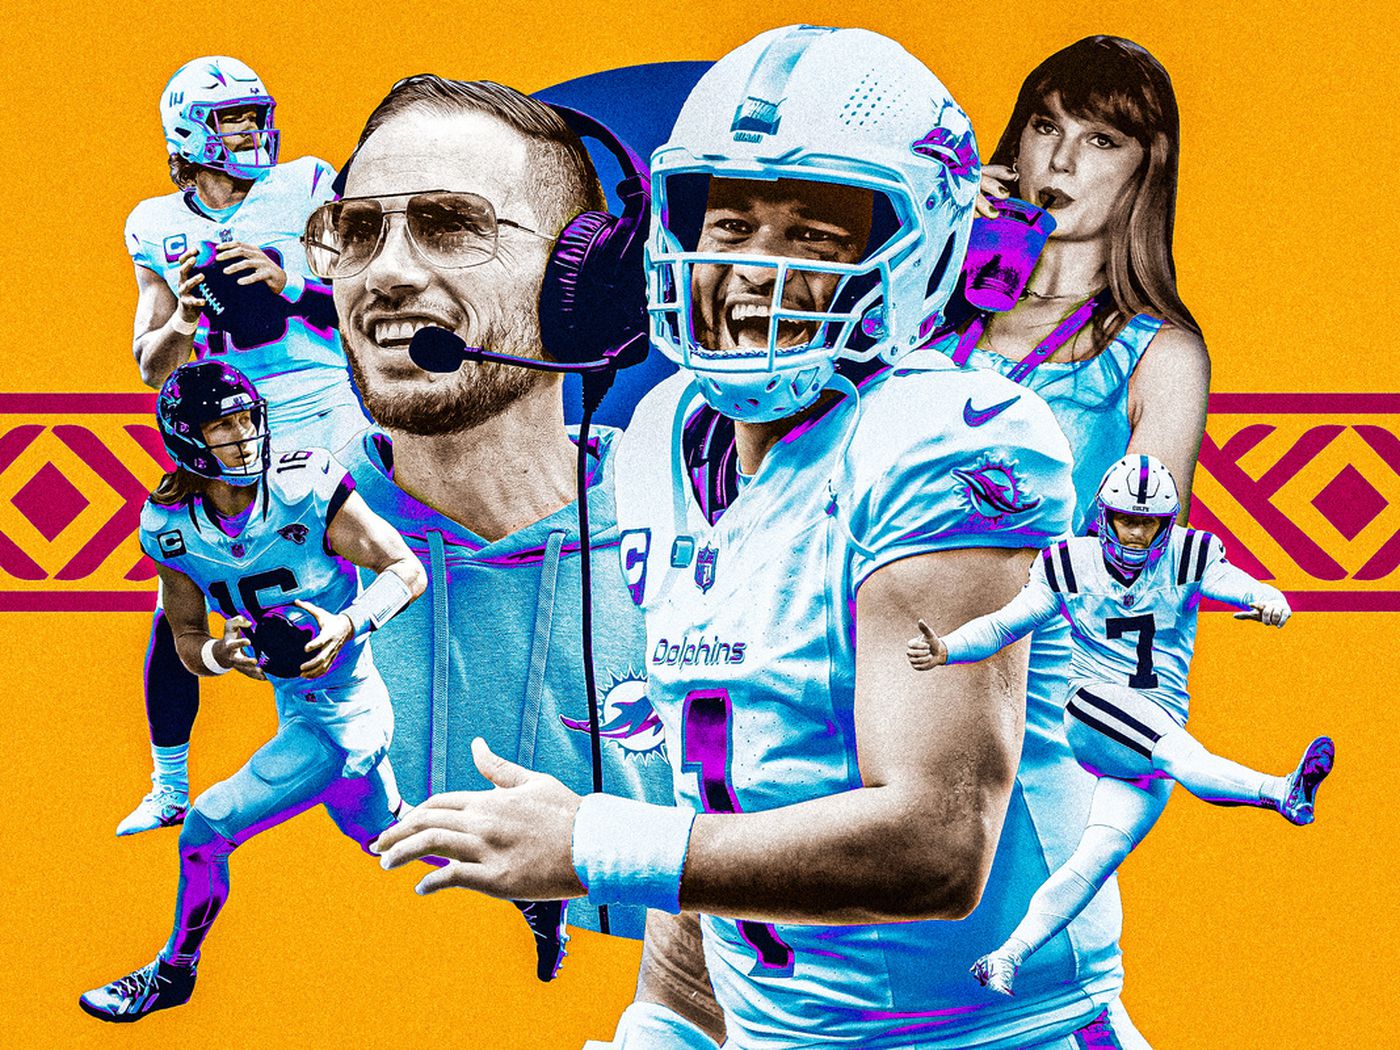 How the 17-0 Perfect Season Dolphins made Miami matter as sports town